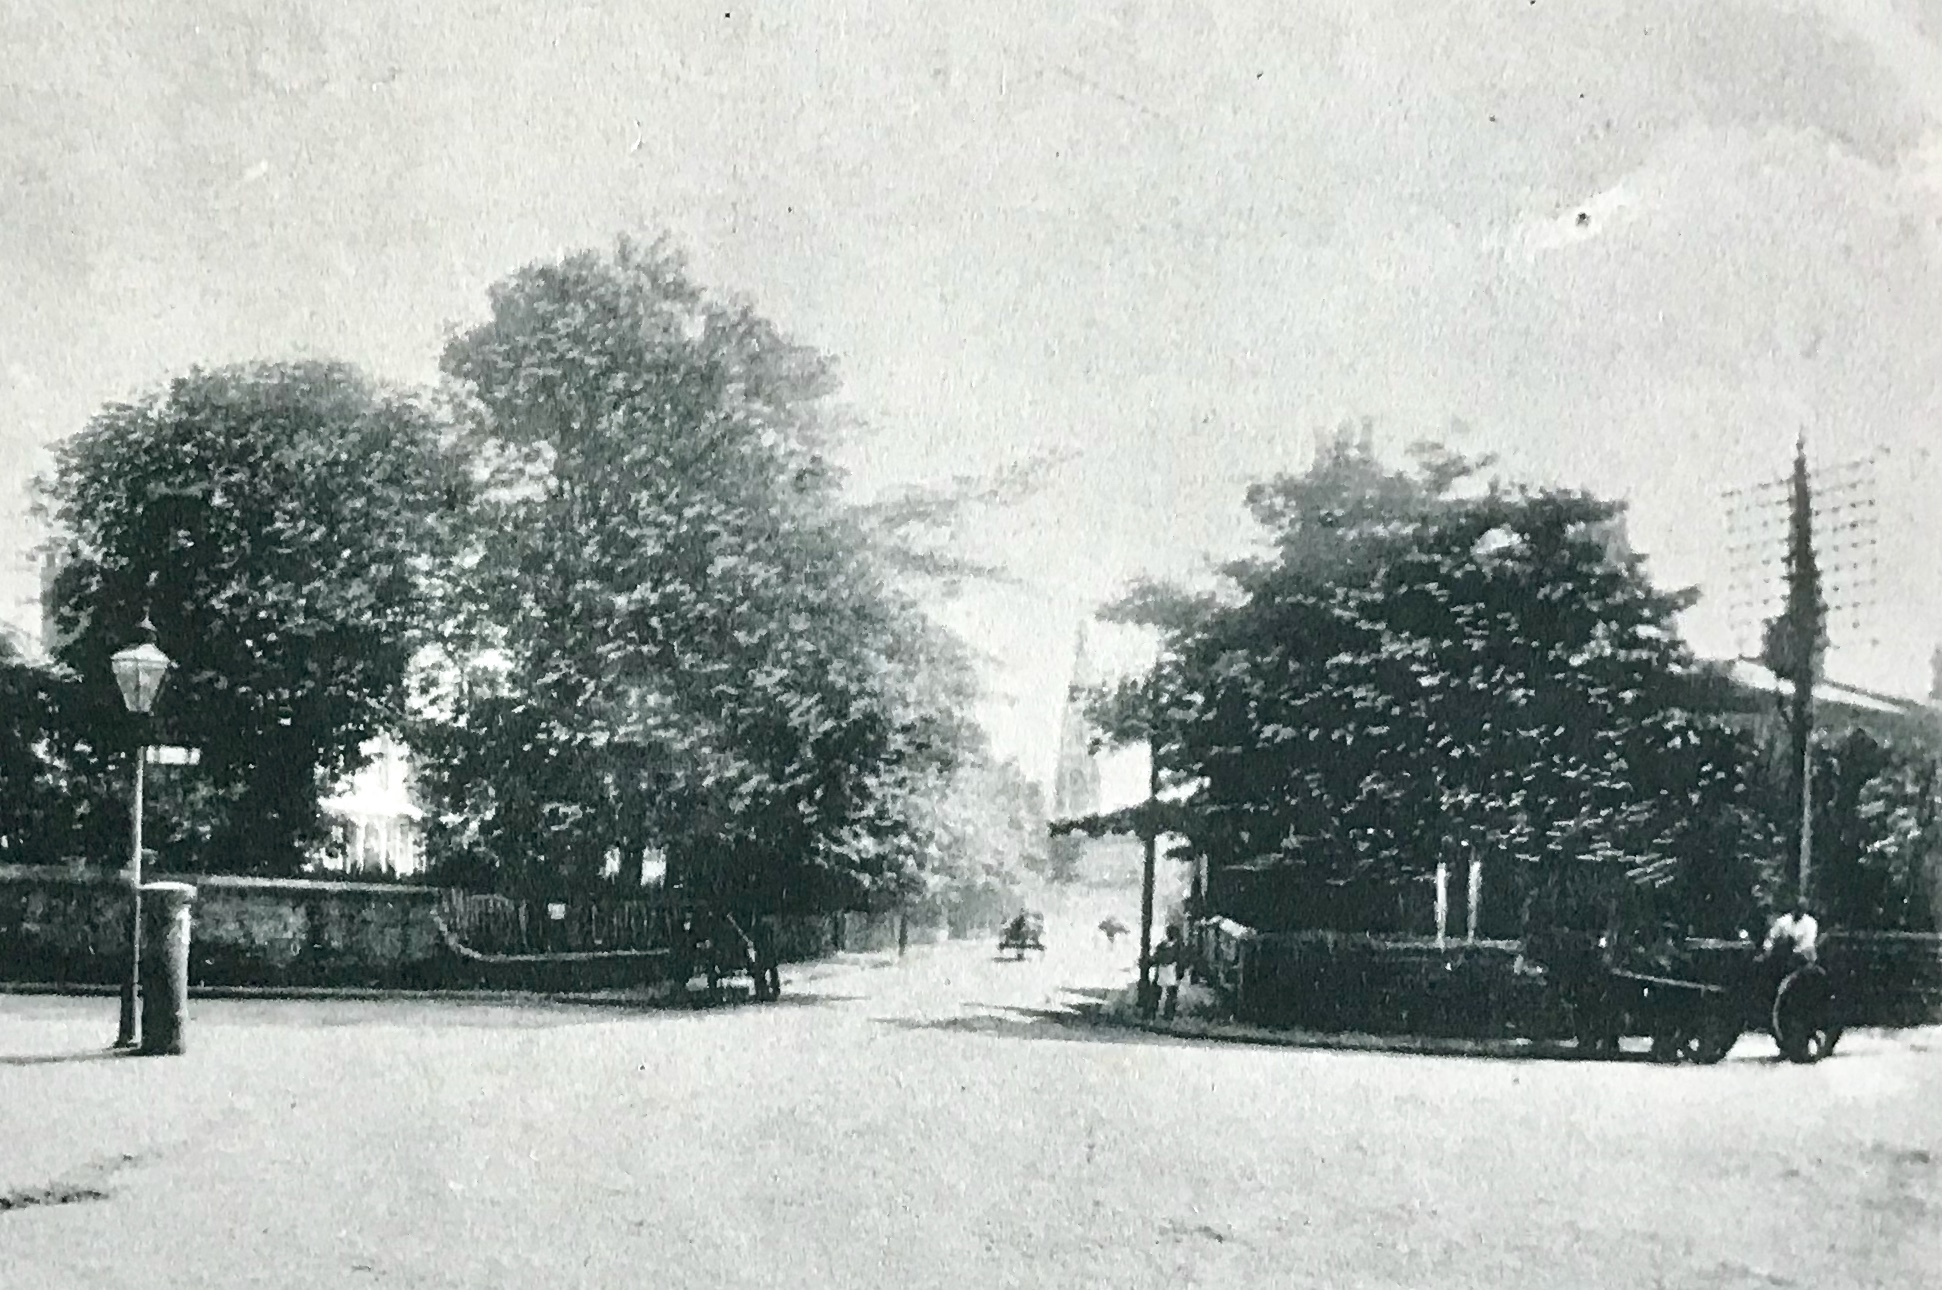 North Lane and St Michael's Road, undated